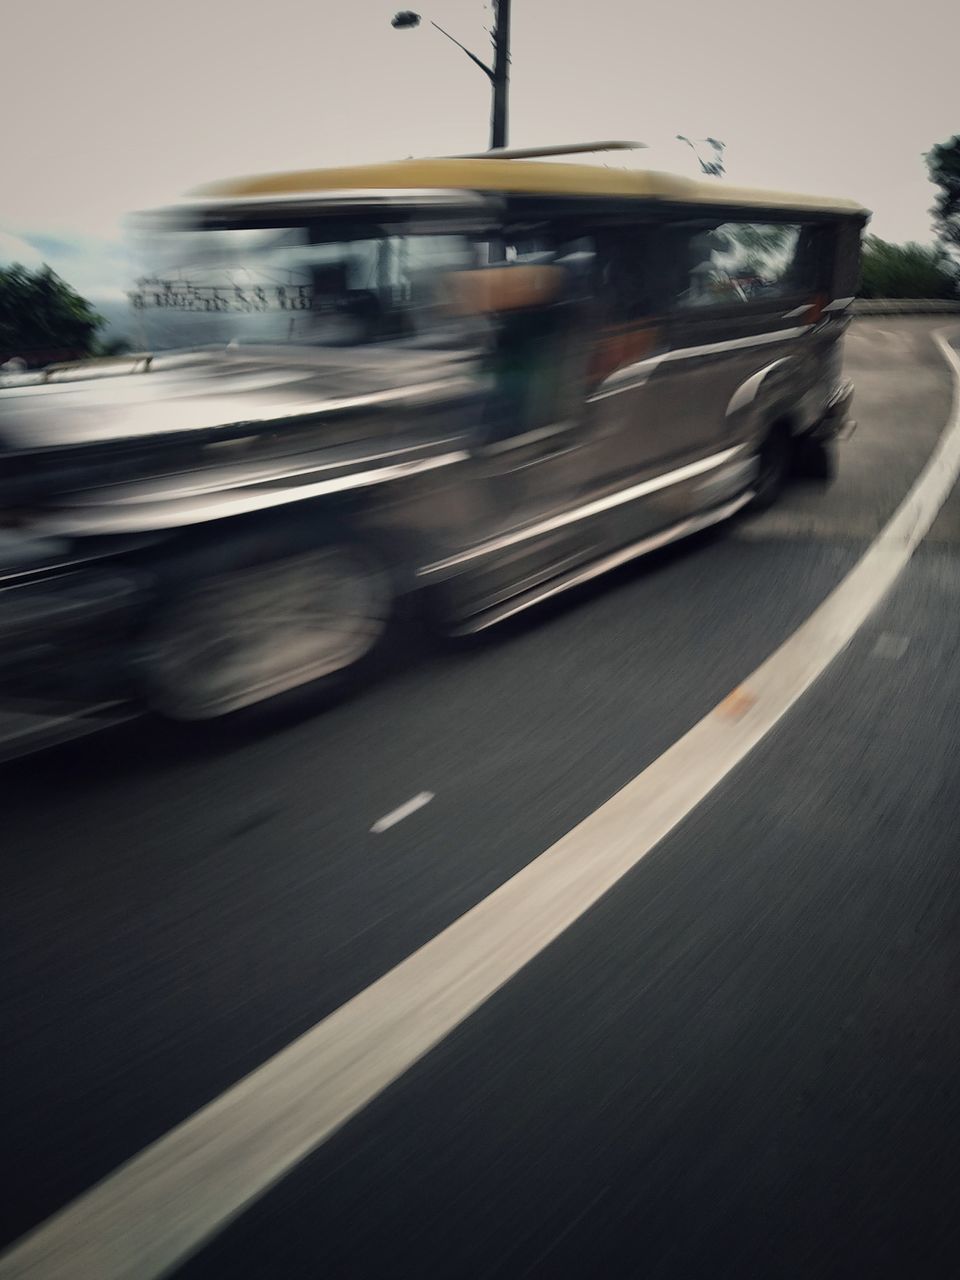 BLURRED MOTION OF CAR ON STREET